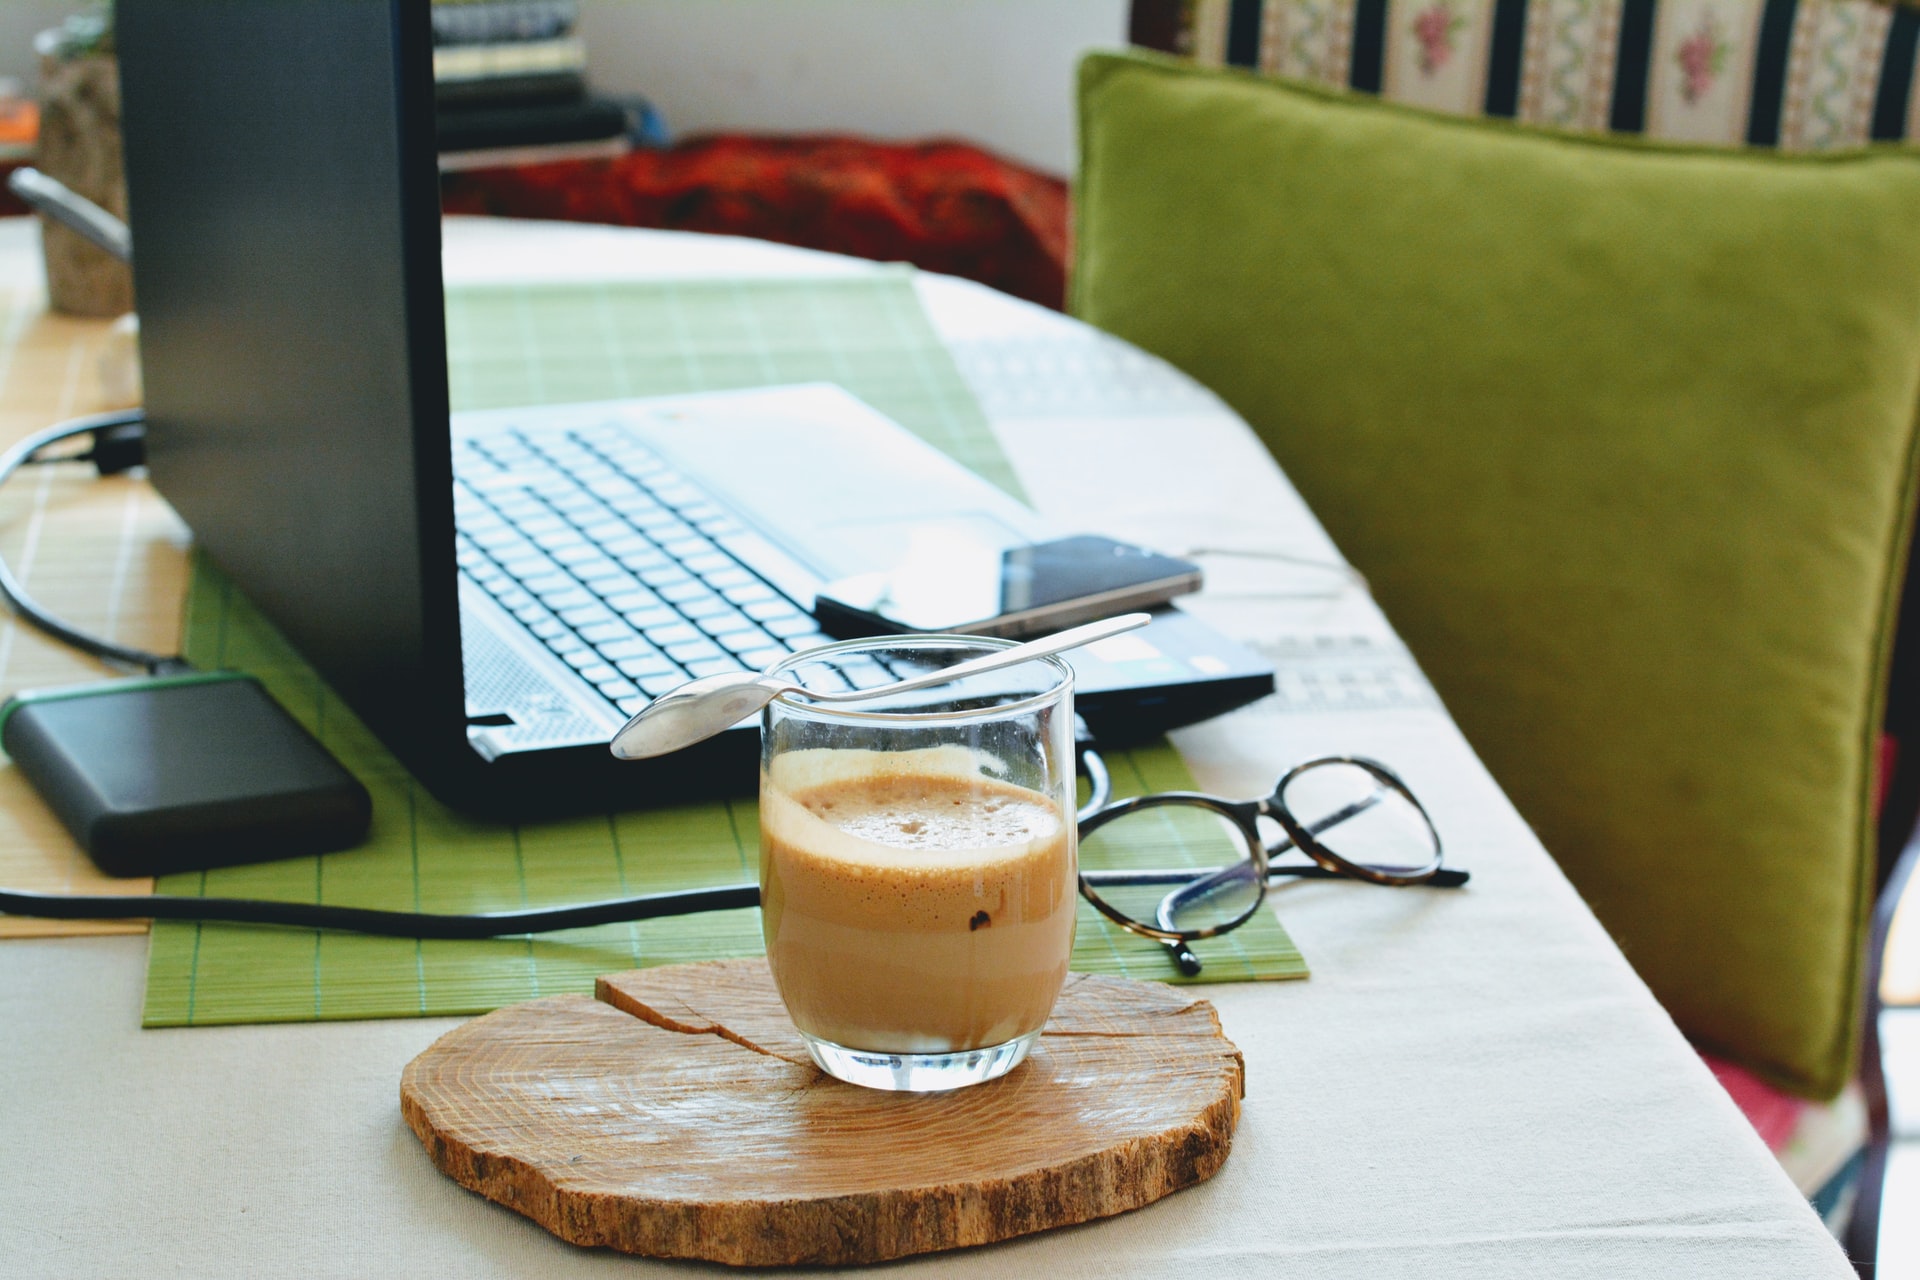 laptop on table with glasses and coffee